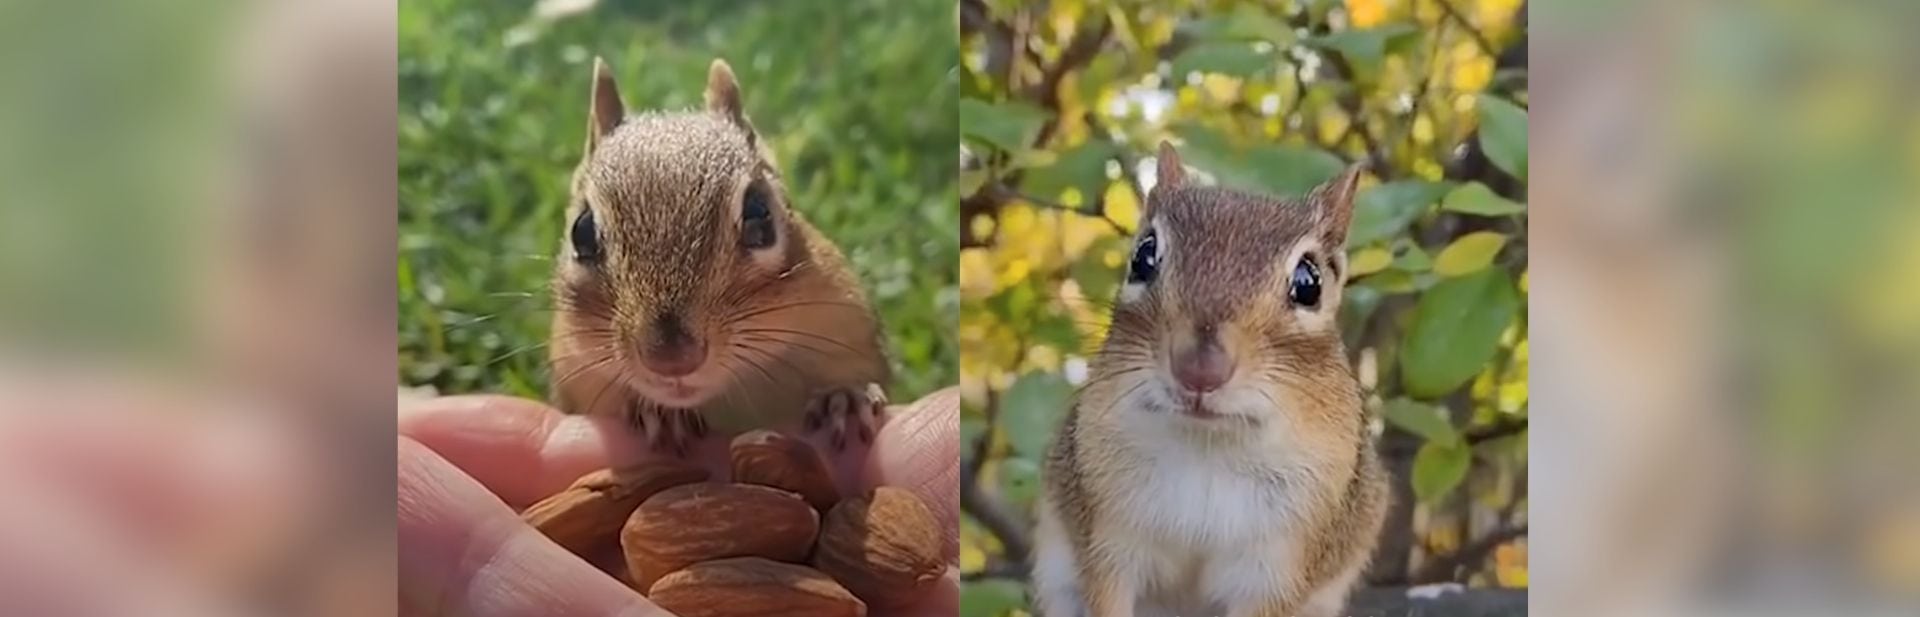 Jealous Chipmunk Throws Big Tantrum as His Human Feeds Other Furry Friend